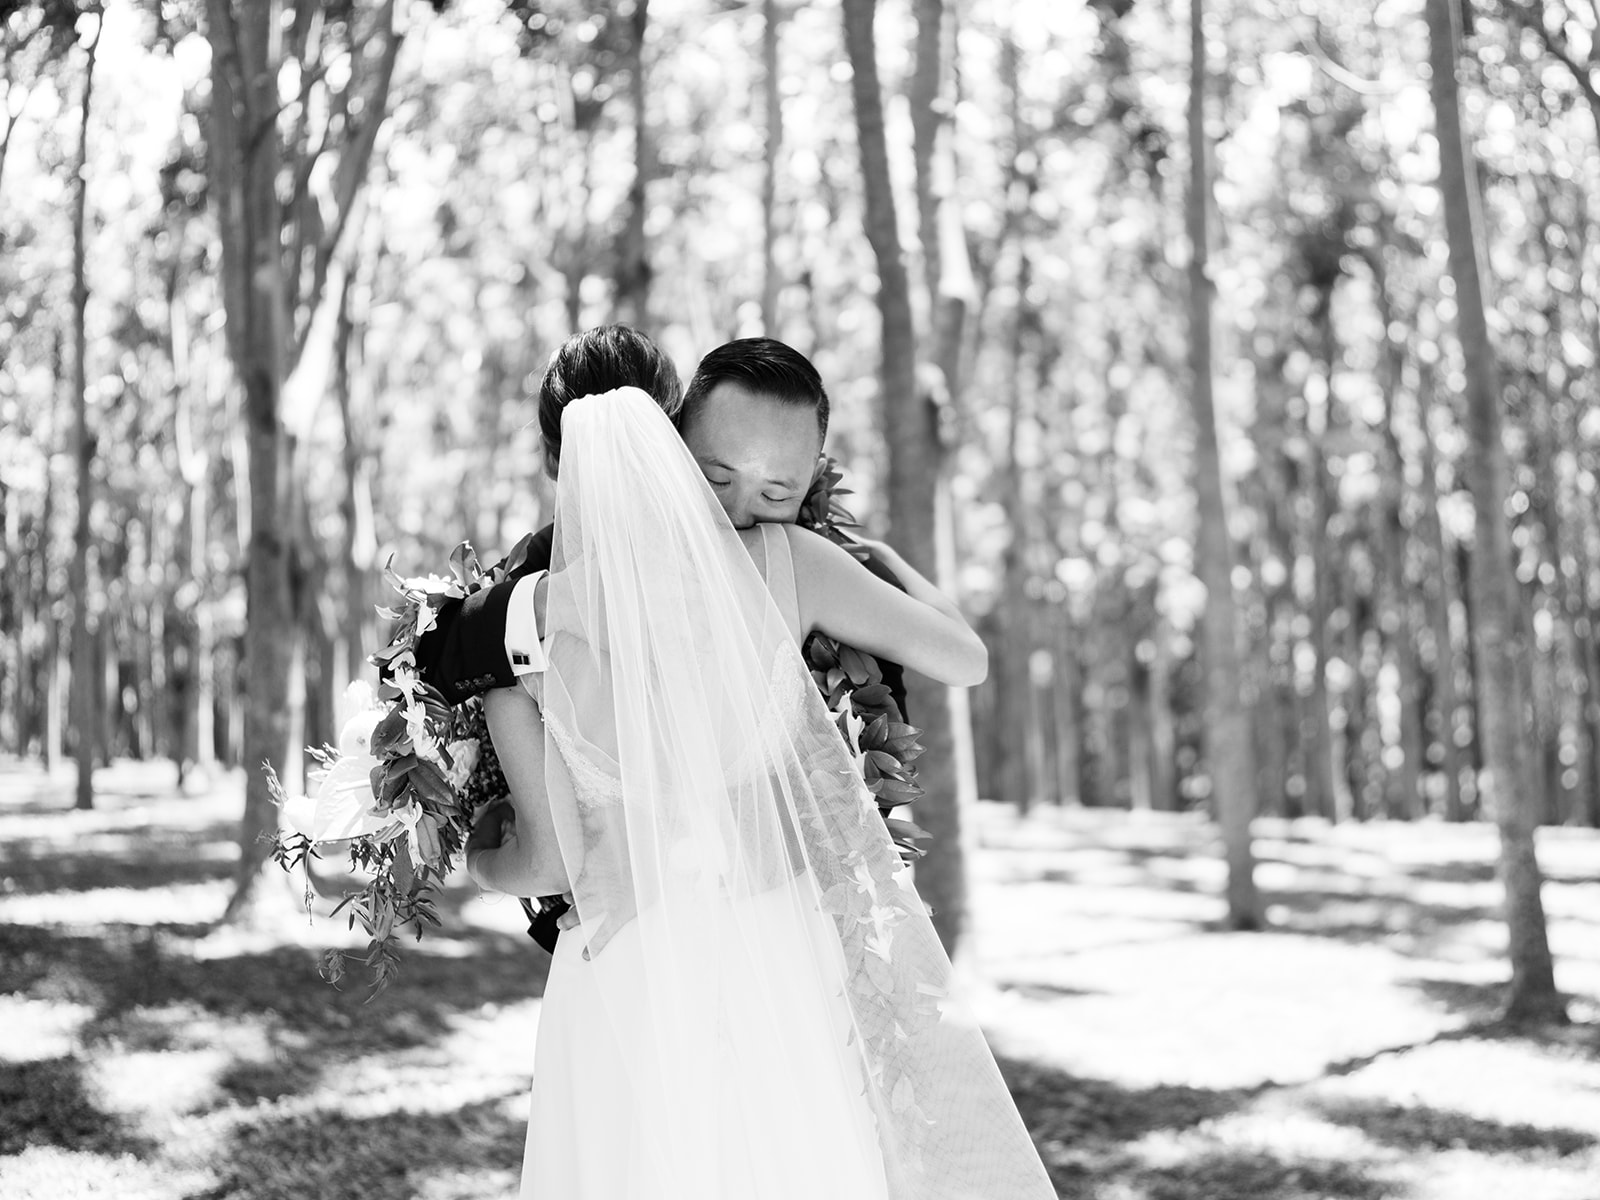 Black and white photo of a  Bride and groom embracing in a forest setting captured by Oahu Wedding Photographer